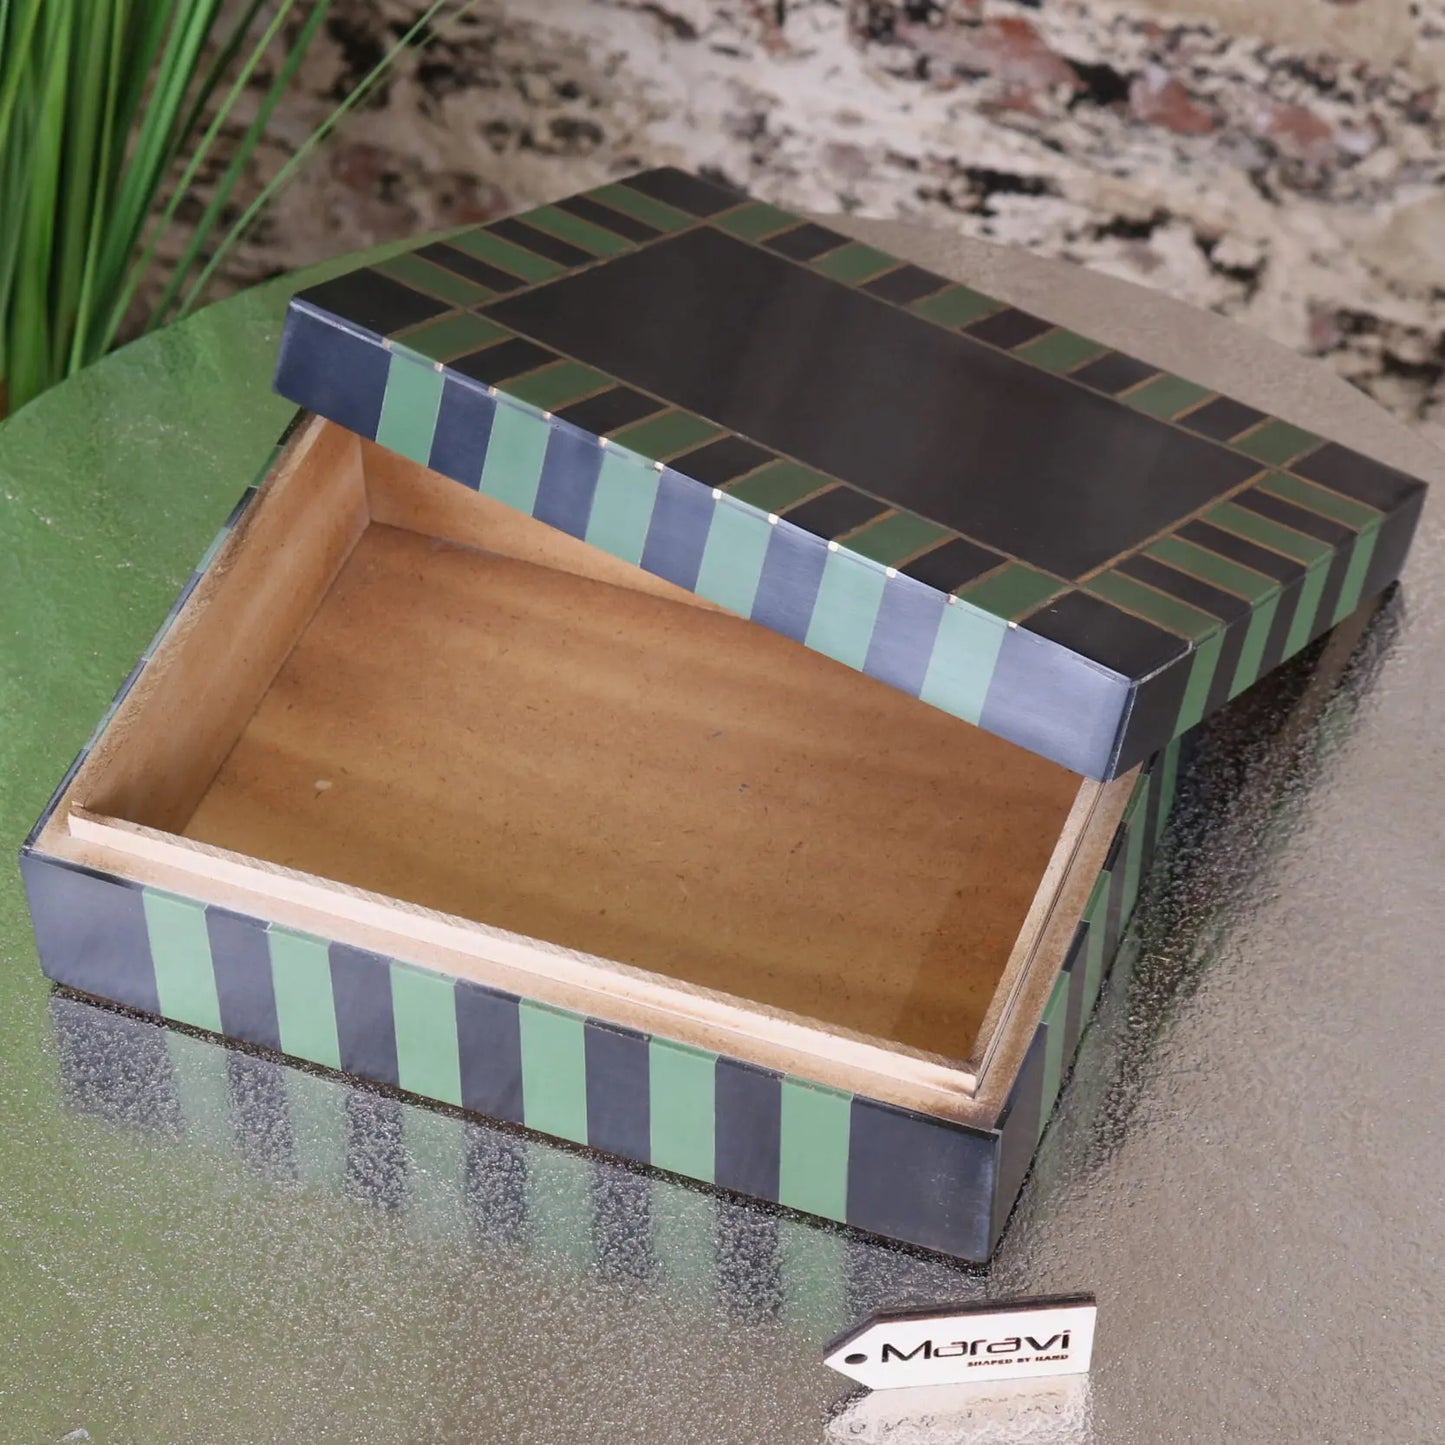 Panna Luxe Resin Jewellery Box - Green - Opened up